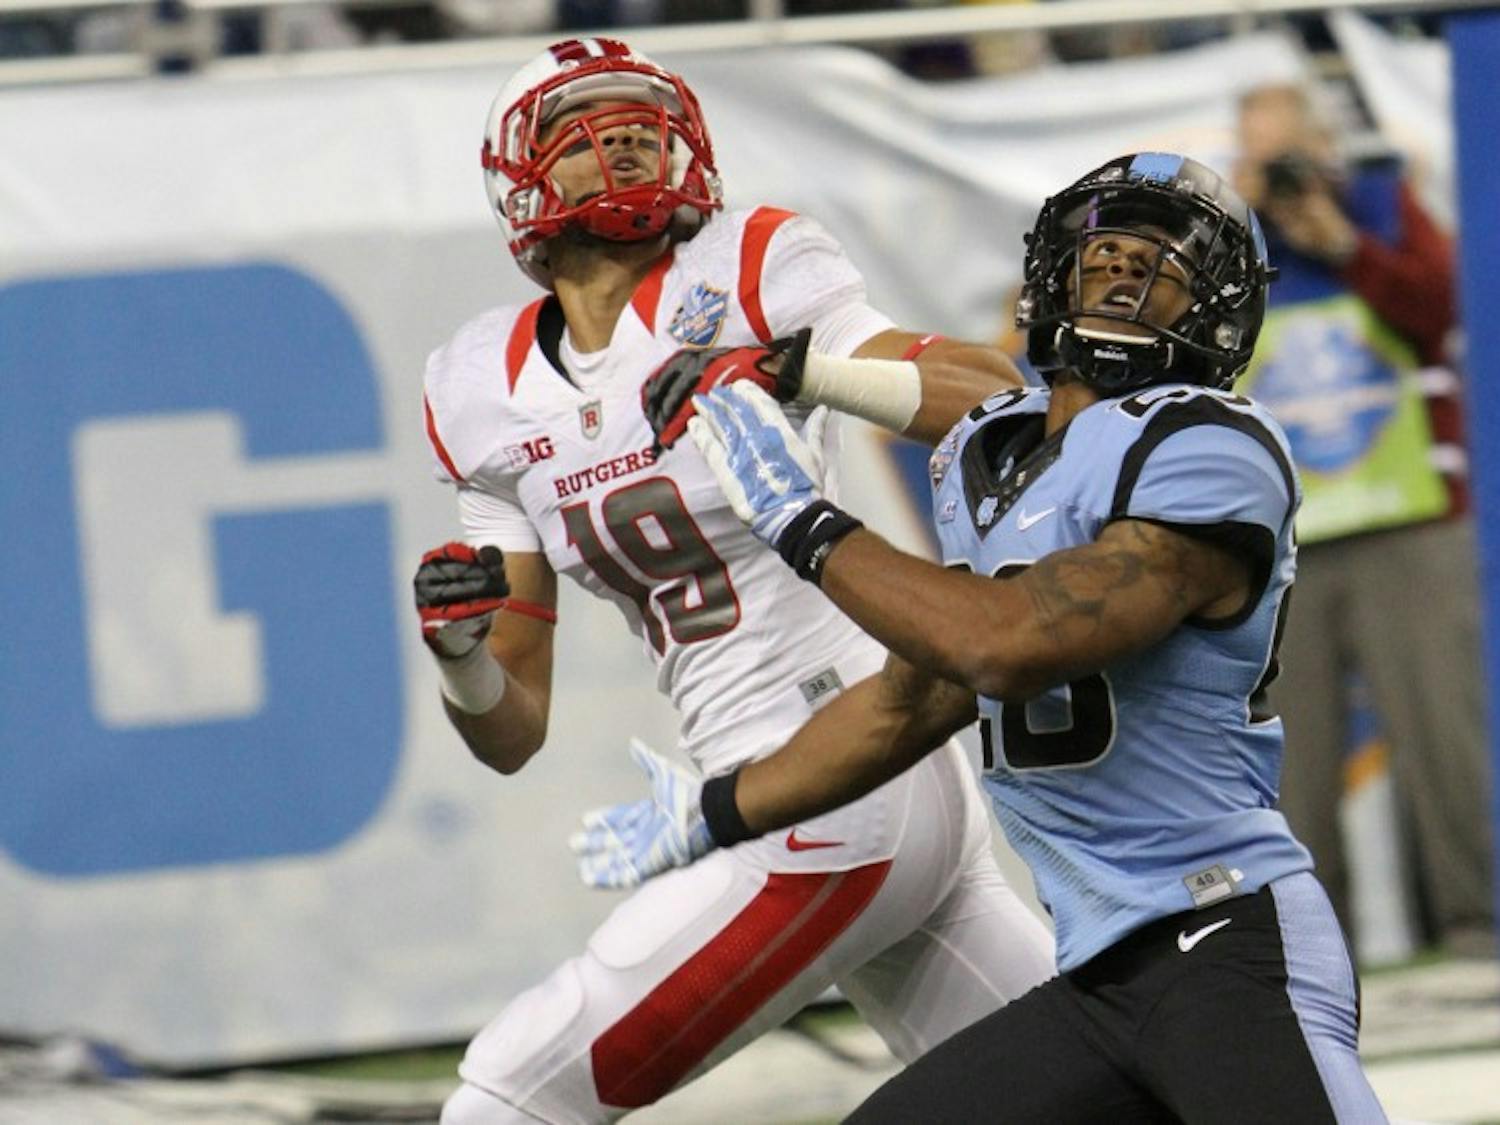 Rutgers senior wide receiver Andrew Turzilli (19) catches a touchdown pass over a Tar Heel defensive back in UNC's 40-21 loss to the Scarlett Knights in the Quick Lane Bowl.